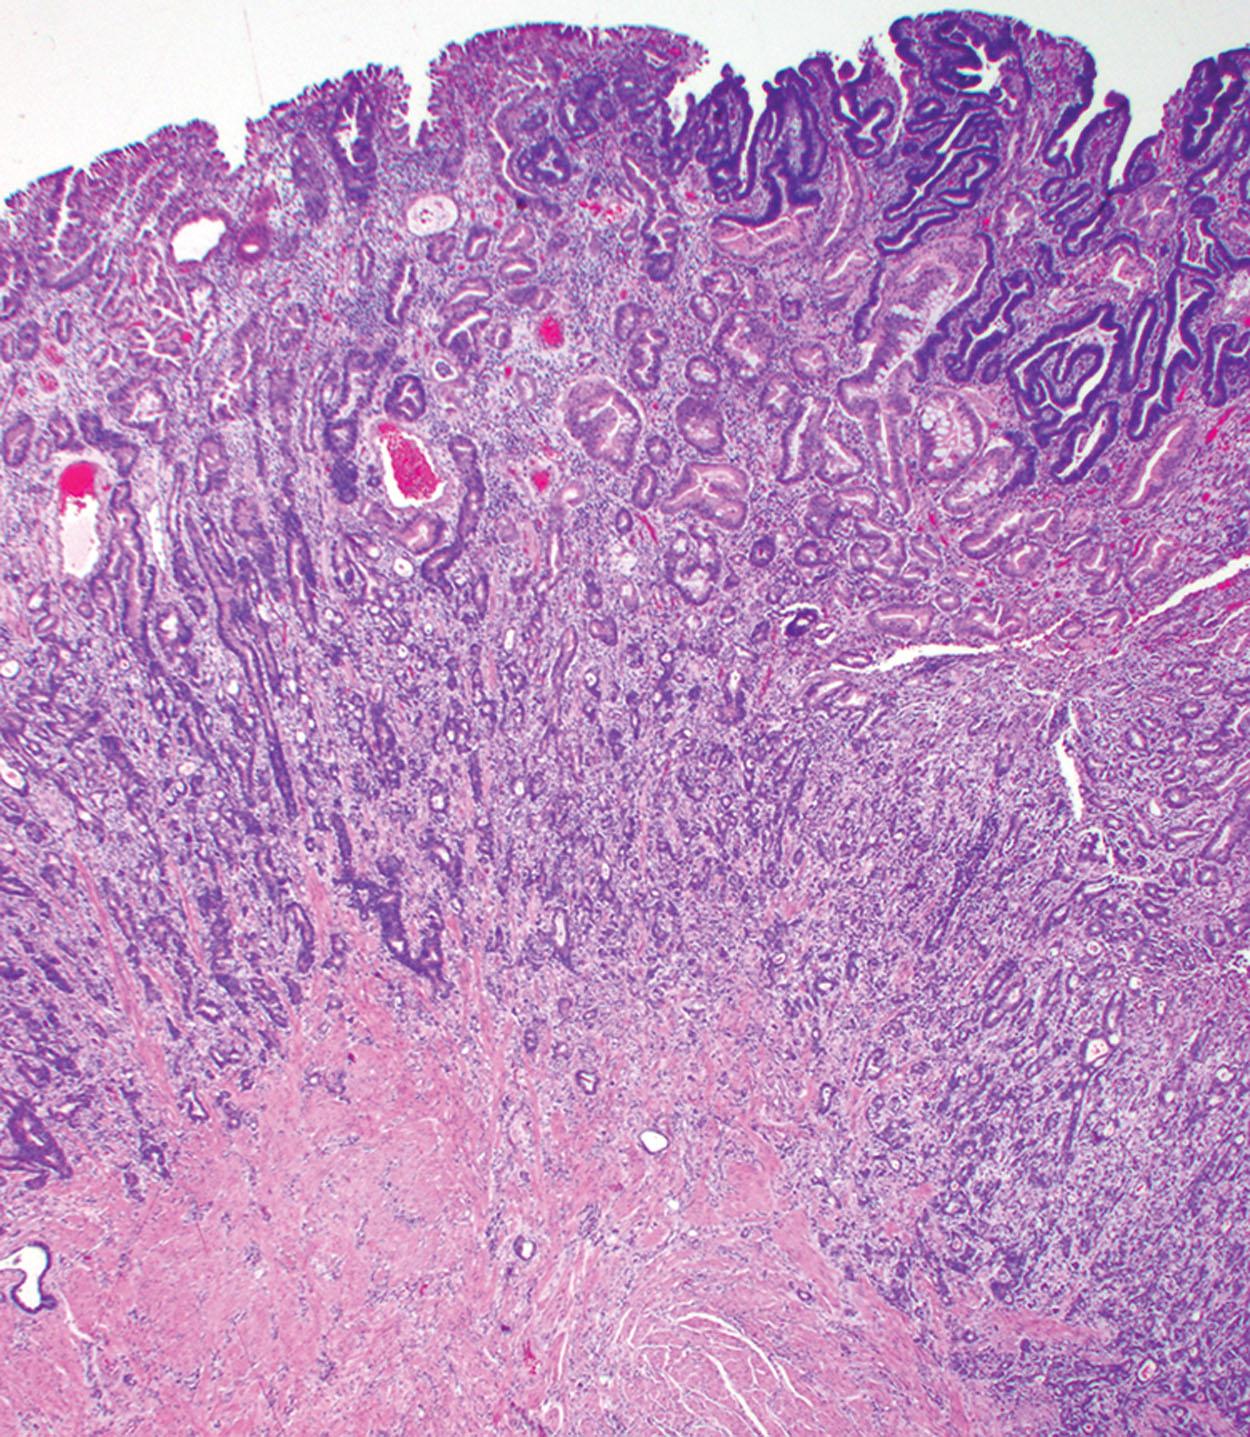 Figure 6.9, Adenocarcinoma of the terminal ileum in the setting of Crohn’s disease. An invasive moderately differentiated adenocarcinoma invades the submucosa and muscularis propria and is present in association wtih dysplasia within the small intestinal mucosa.